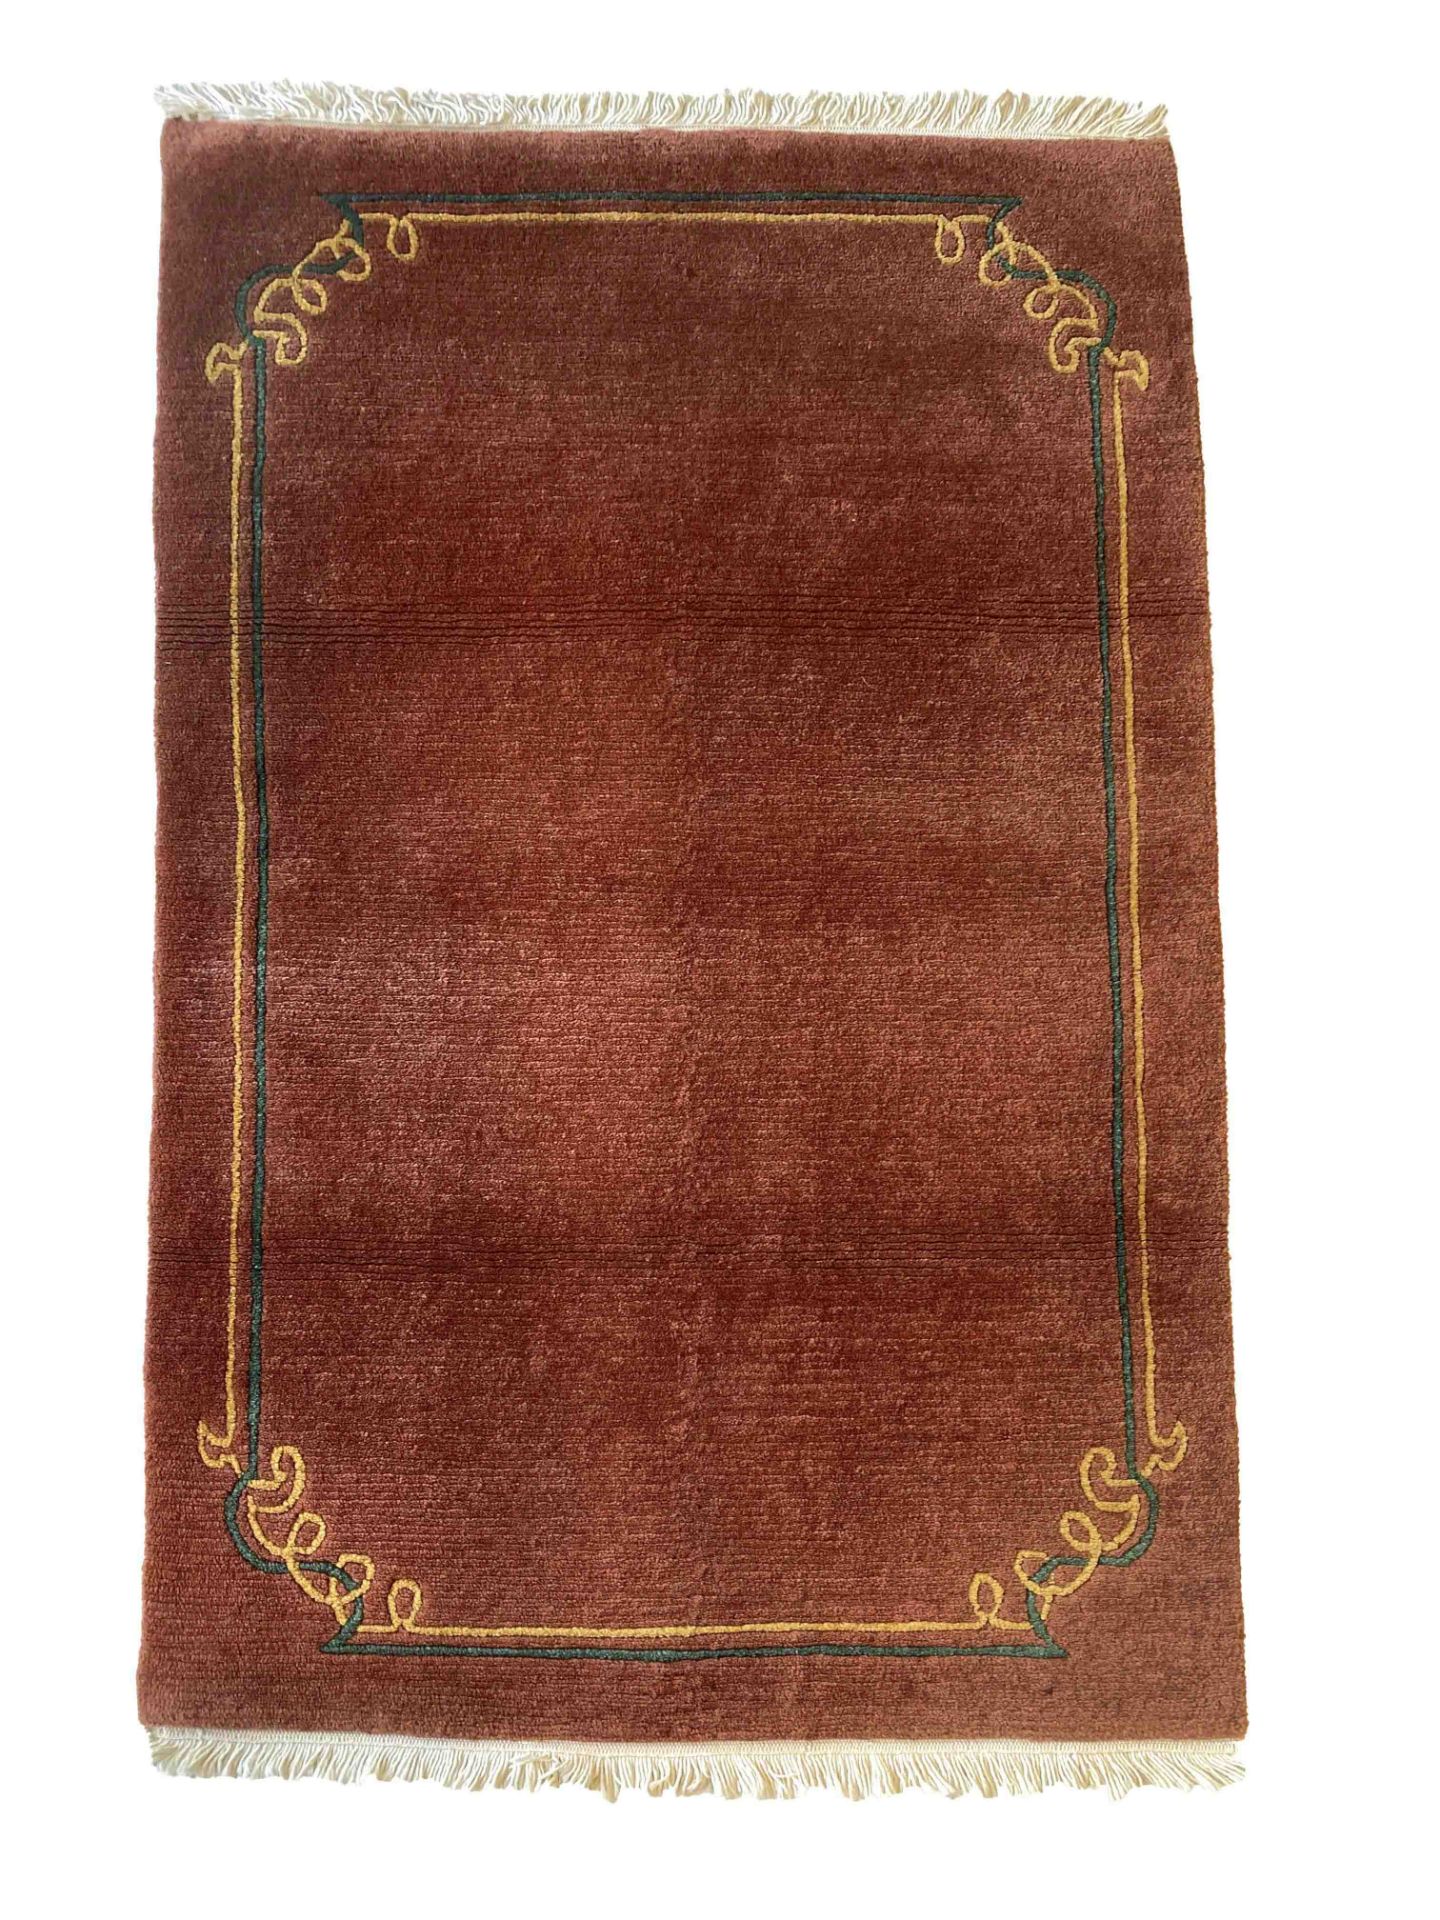 Carpet, Tibet, good condition, 162 x 92 cm - The carpet can only be viewed and collected at